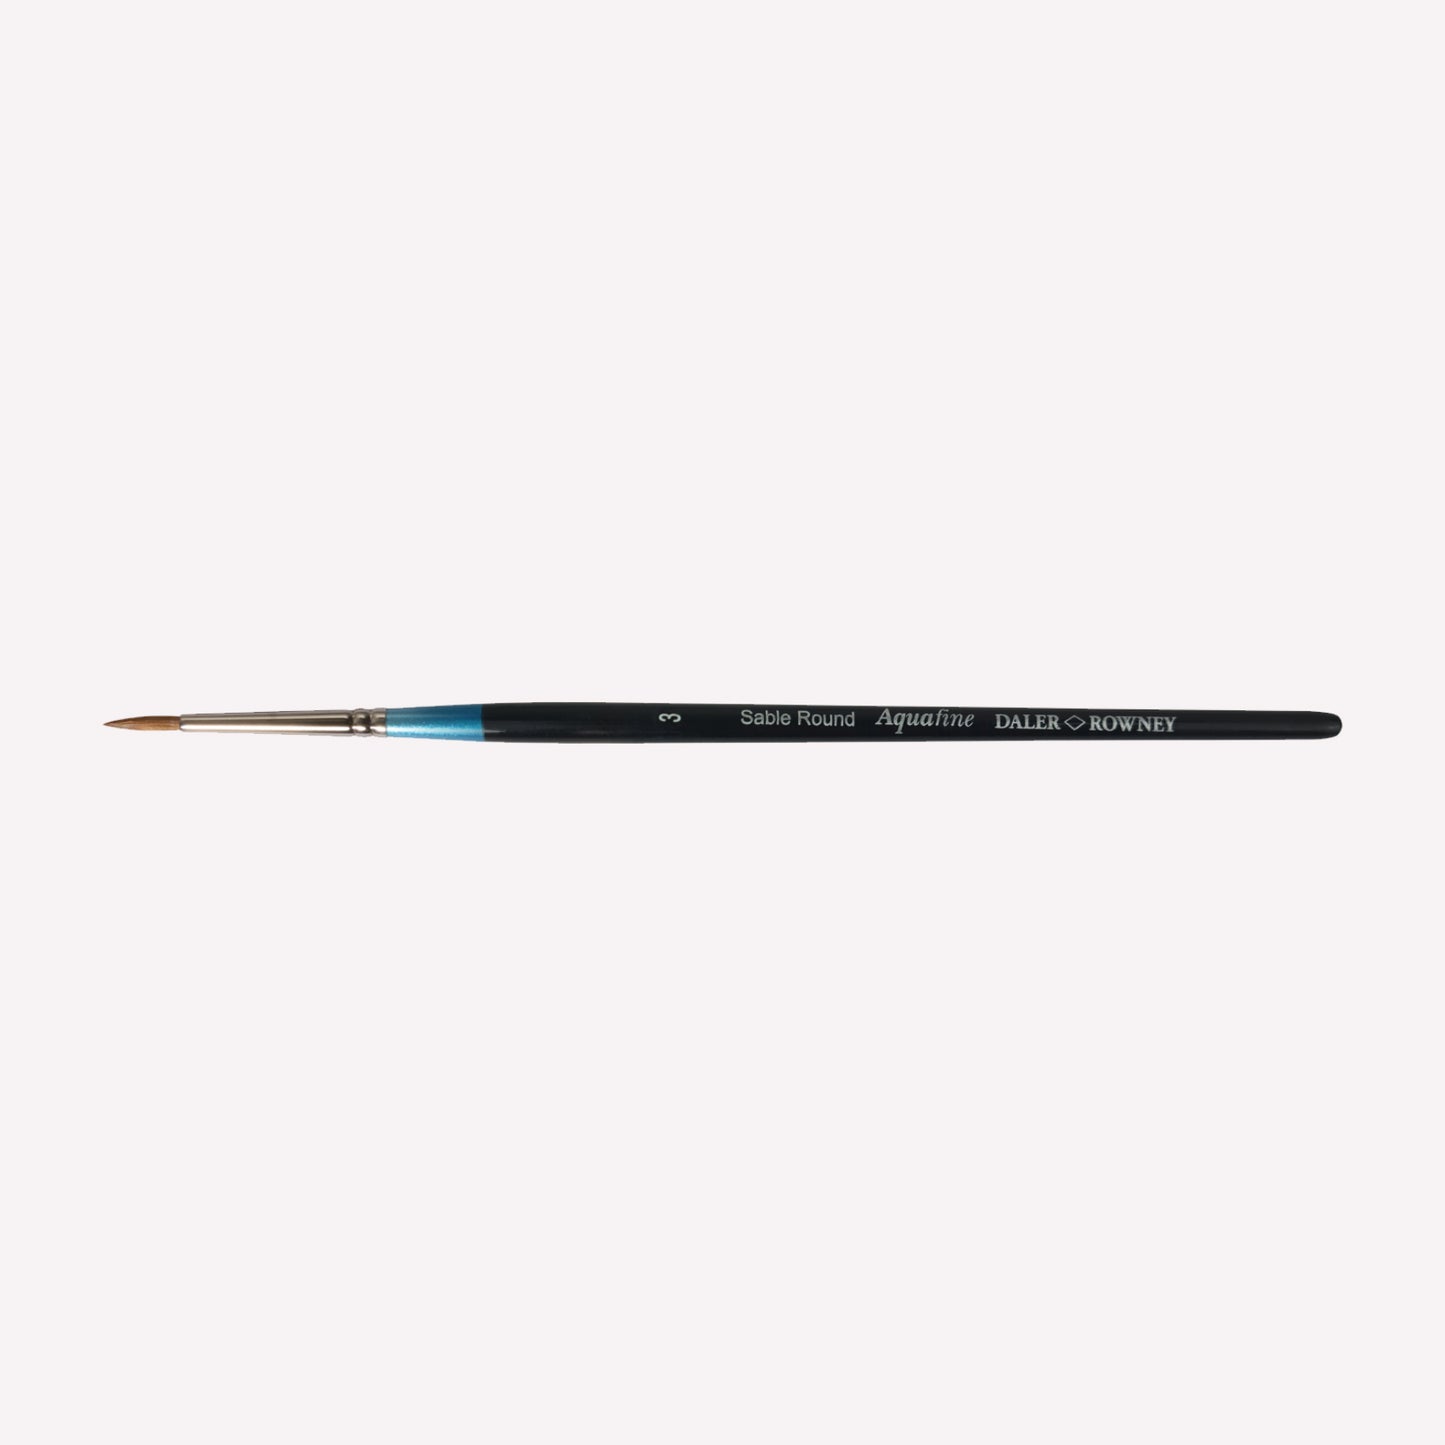 Daler Rowney Aquafine Sable round paintbrush in size 3. The natural filaments come to a fine point, perfect for detailed paintings. Brushes have a classy black handle with blue detailing and a silver ferrule. 